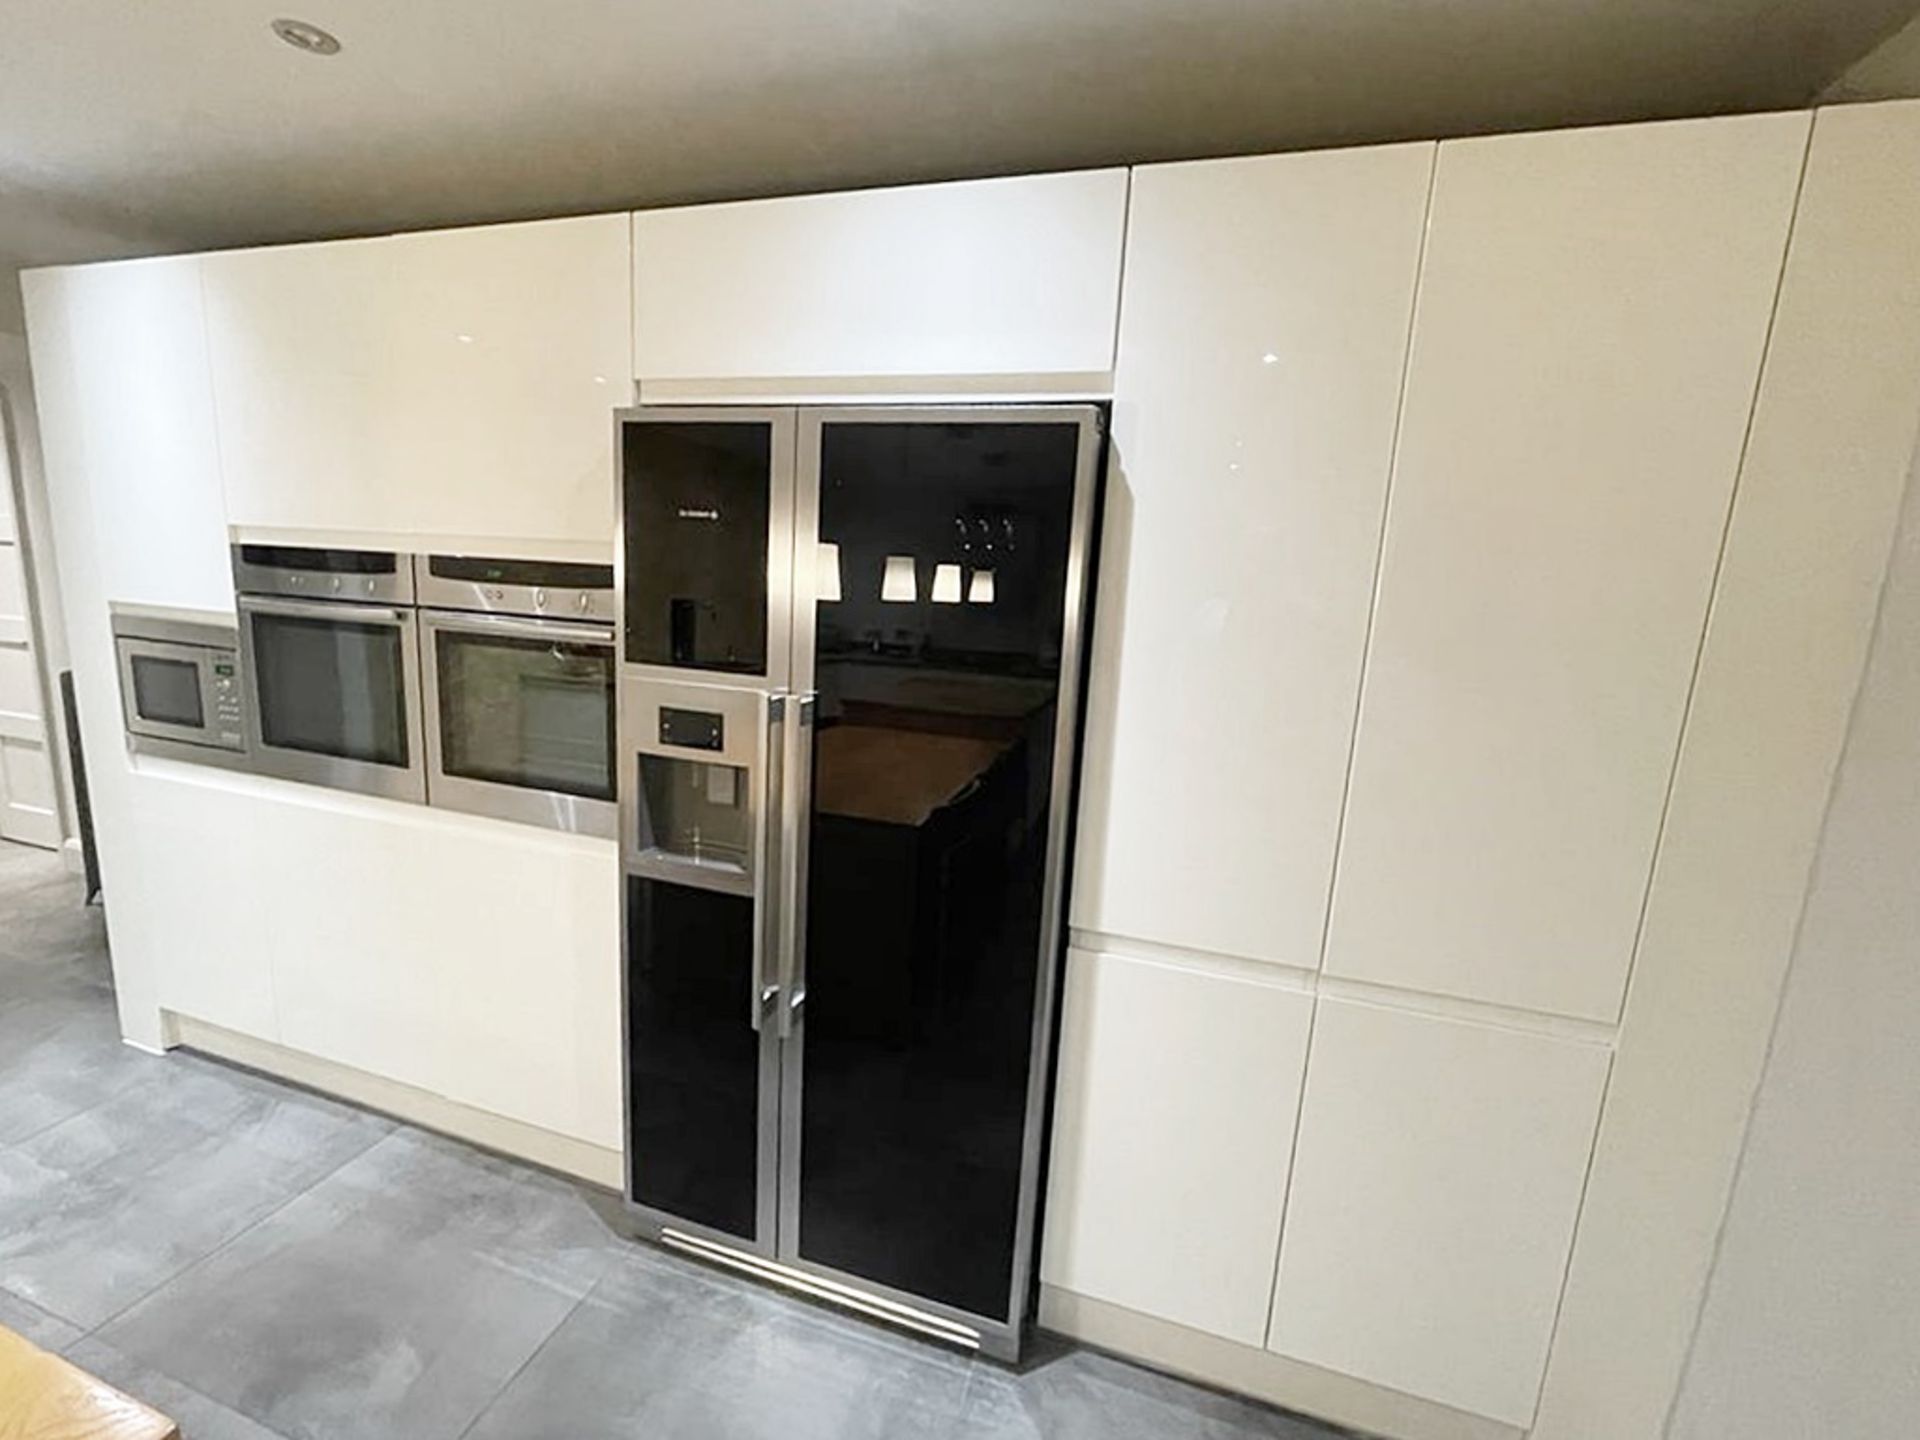 1 x Stunning PARAPAN Handleless Fitted Kitchen with Neff Appliances, Granite Worktops & Island - Image 81 of 126